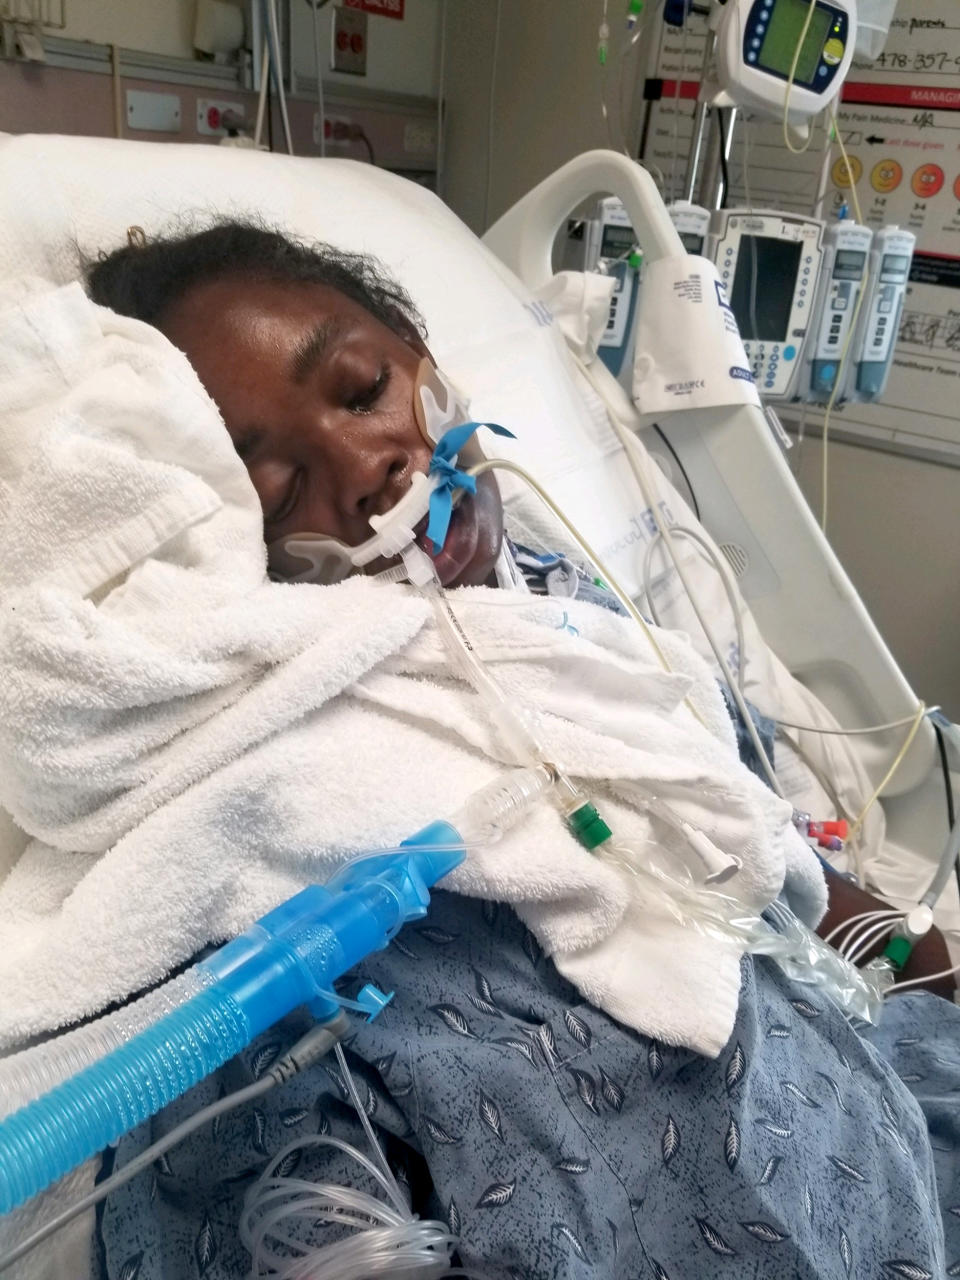 Brianna Grier, 28, at Grady Memorial Hospital in Atlanta after she was placed on a ventilator. (Courtesy Lottie Grier)